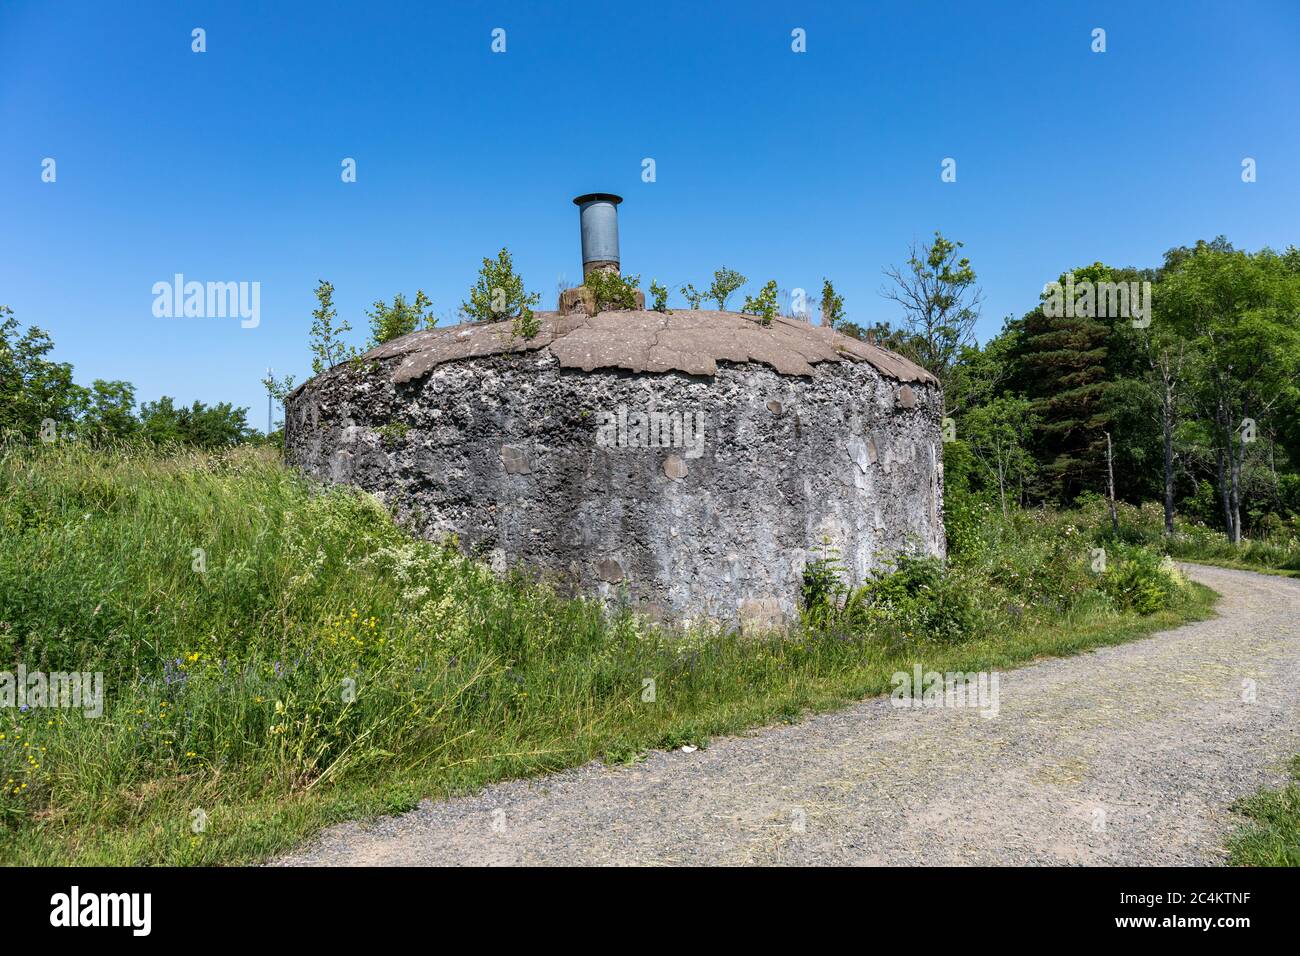 Old silapidated military structure in Vallisaari, former military island in archipelago of Helsinki, Finland Stock Photo